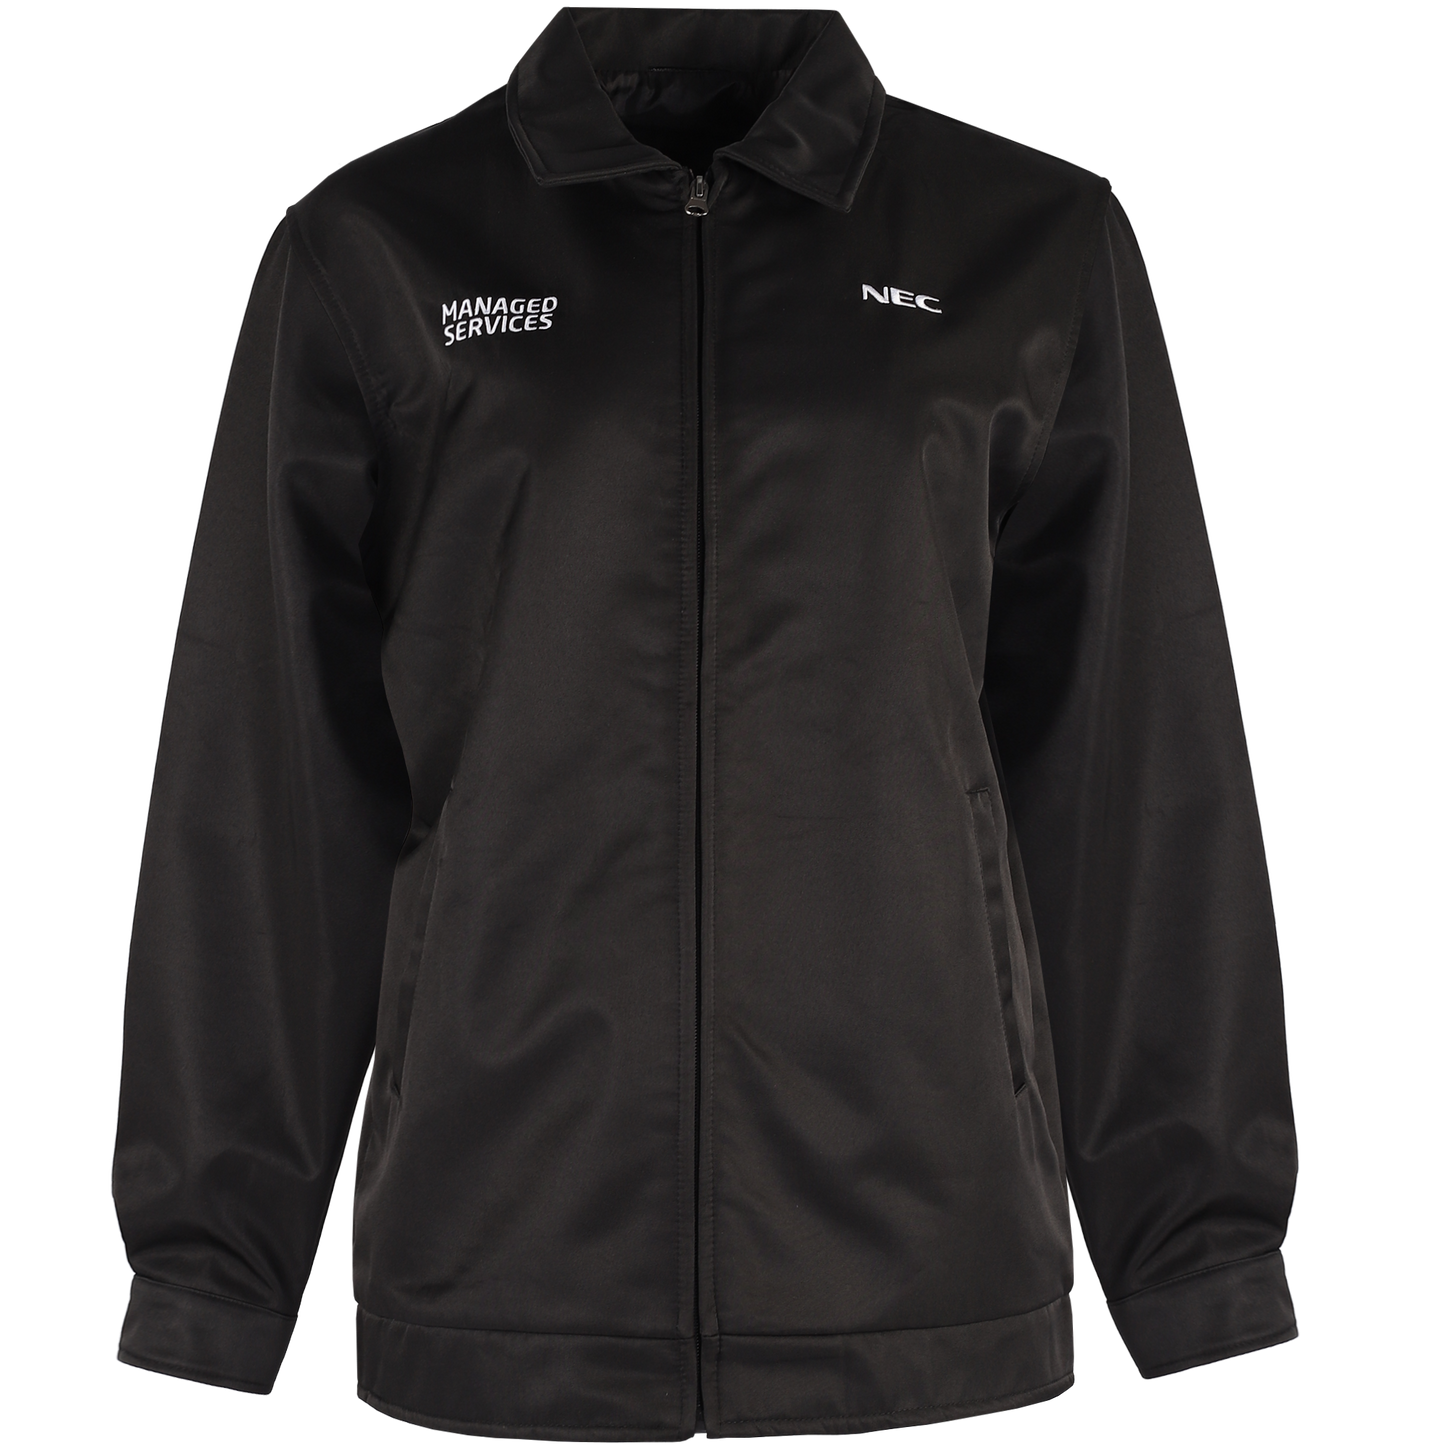 Black NEC Windbreaker with embroidery Uniform designed by CYC